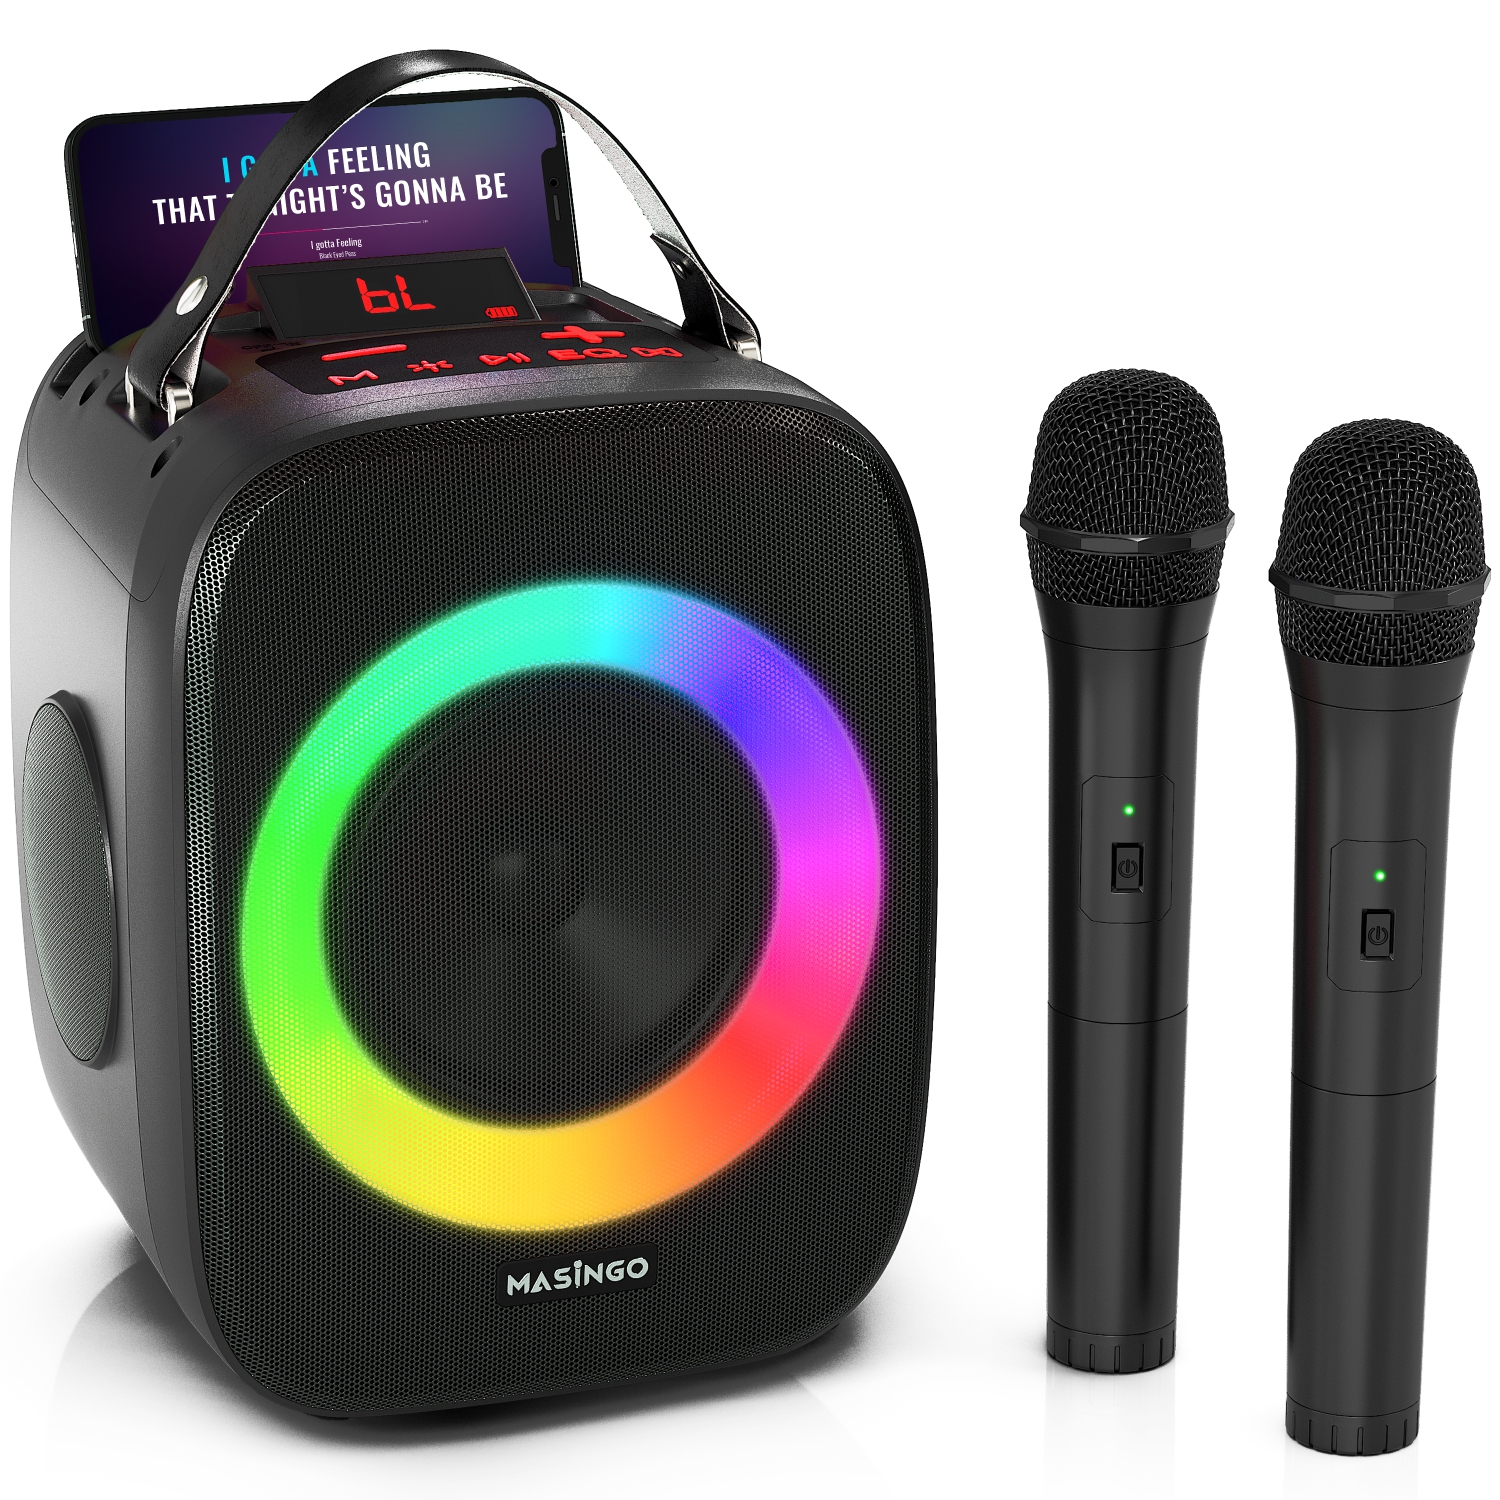 Karaoke Machine for Kids and Adults with 2 Wireless Bluetooth Microphones, Portable 3D Sound Speaker with Colorful LED Lights, Supports TF Card/USB, AUX in, FM, TWS for Home Party